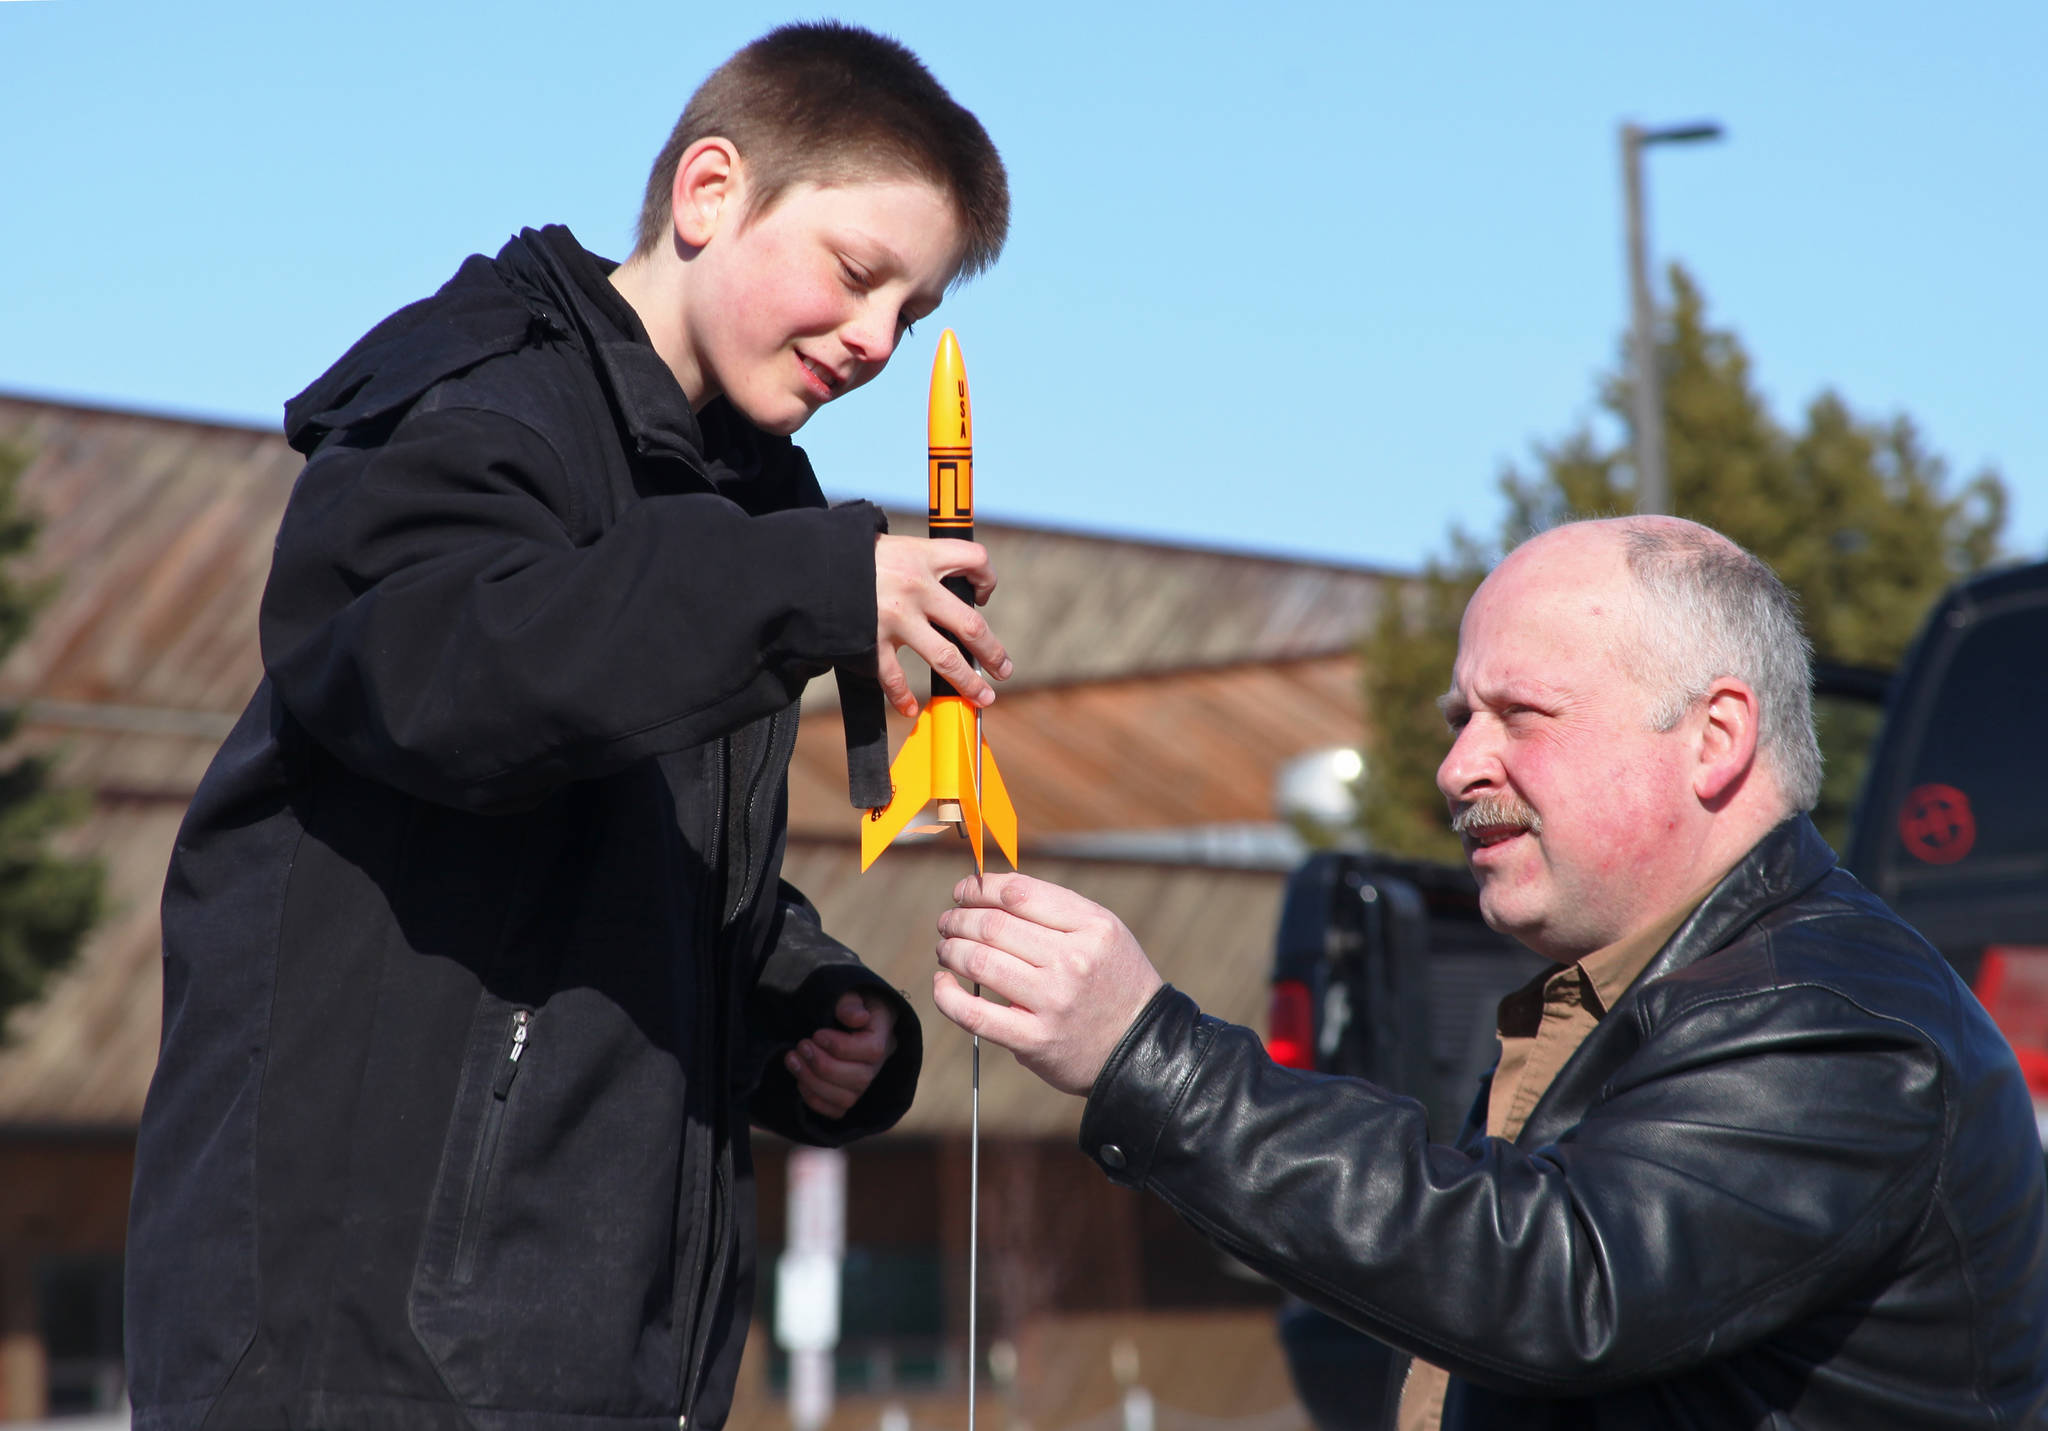 Asa Lorentzen (left) mounts a model rocket on its launch rod while instructor Scott Aleckson observes in the parking lot of the Soldotna Regional Sports Complex in Soldotna on Saturday. Aleckson said he made and launched his first plastic, balsa wood, and cardboard rocket as a 4th grade student at Soldotna Elementary School. Since then he’s built a custom launch system, he said, “with recycled electronics and a lot of soldering time.” Aleckson taught Saturday’s rocketry class through the Soldotna Community Schools program, and would like to continue spreading the hobby. “If I could get a model rocket club going, that’d be great,” he said. “Stuff like this is much more fun in a group.” (Photo by Ben Boettger/Peninsula Clarion)